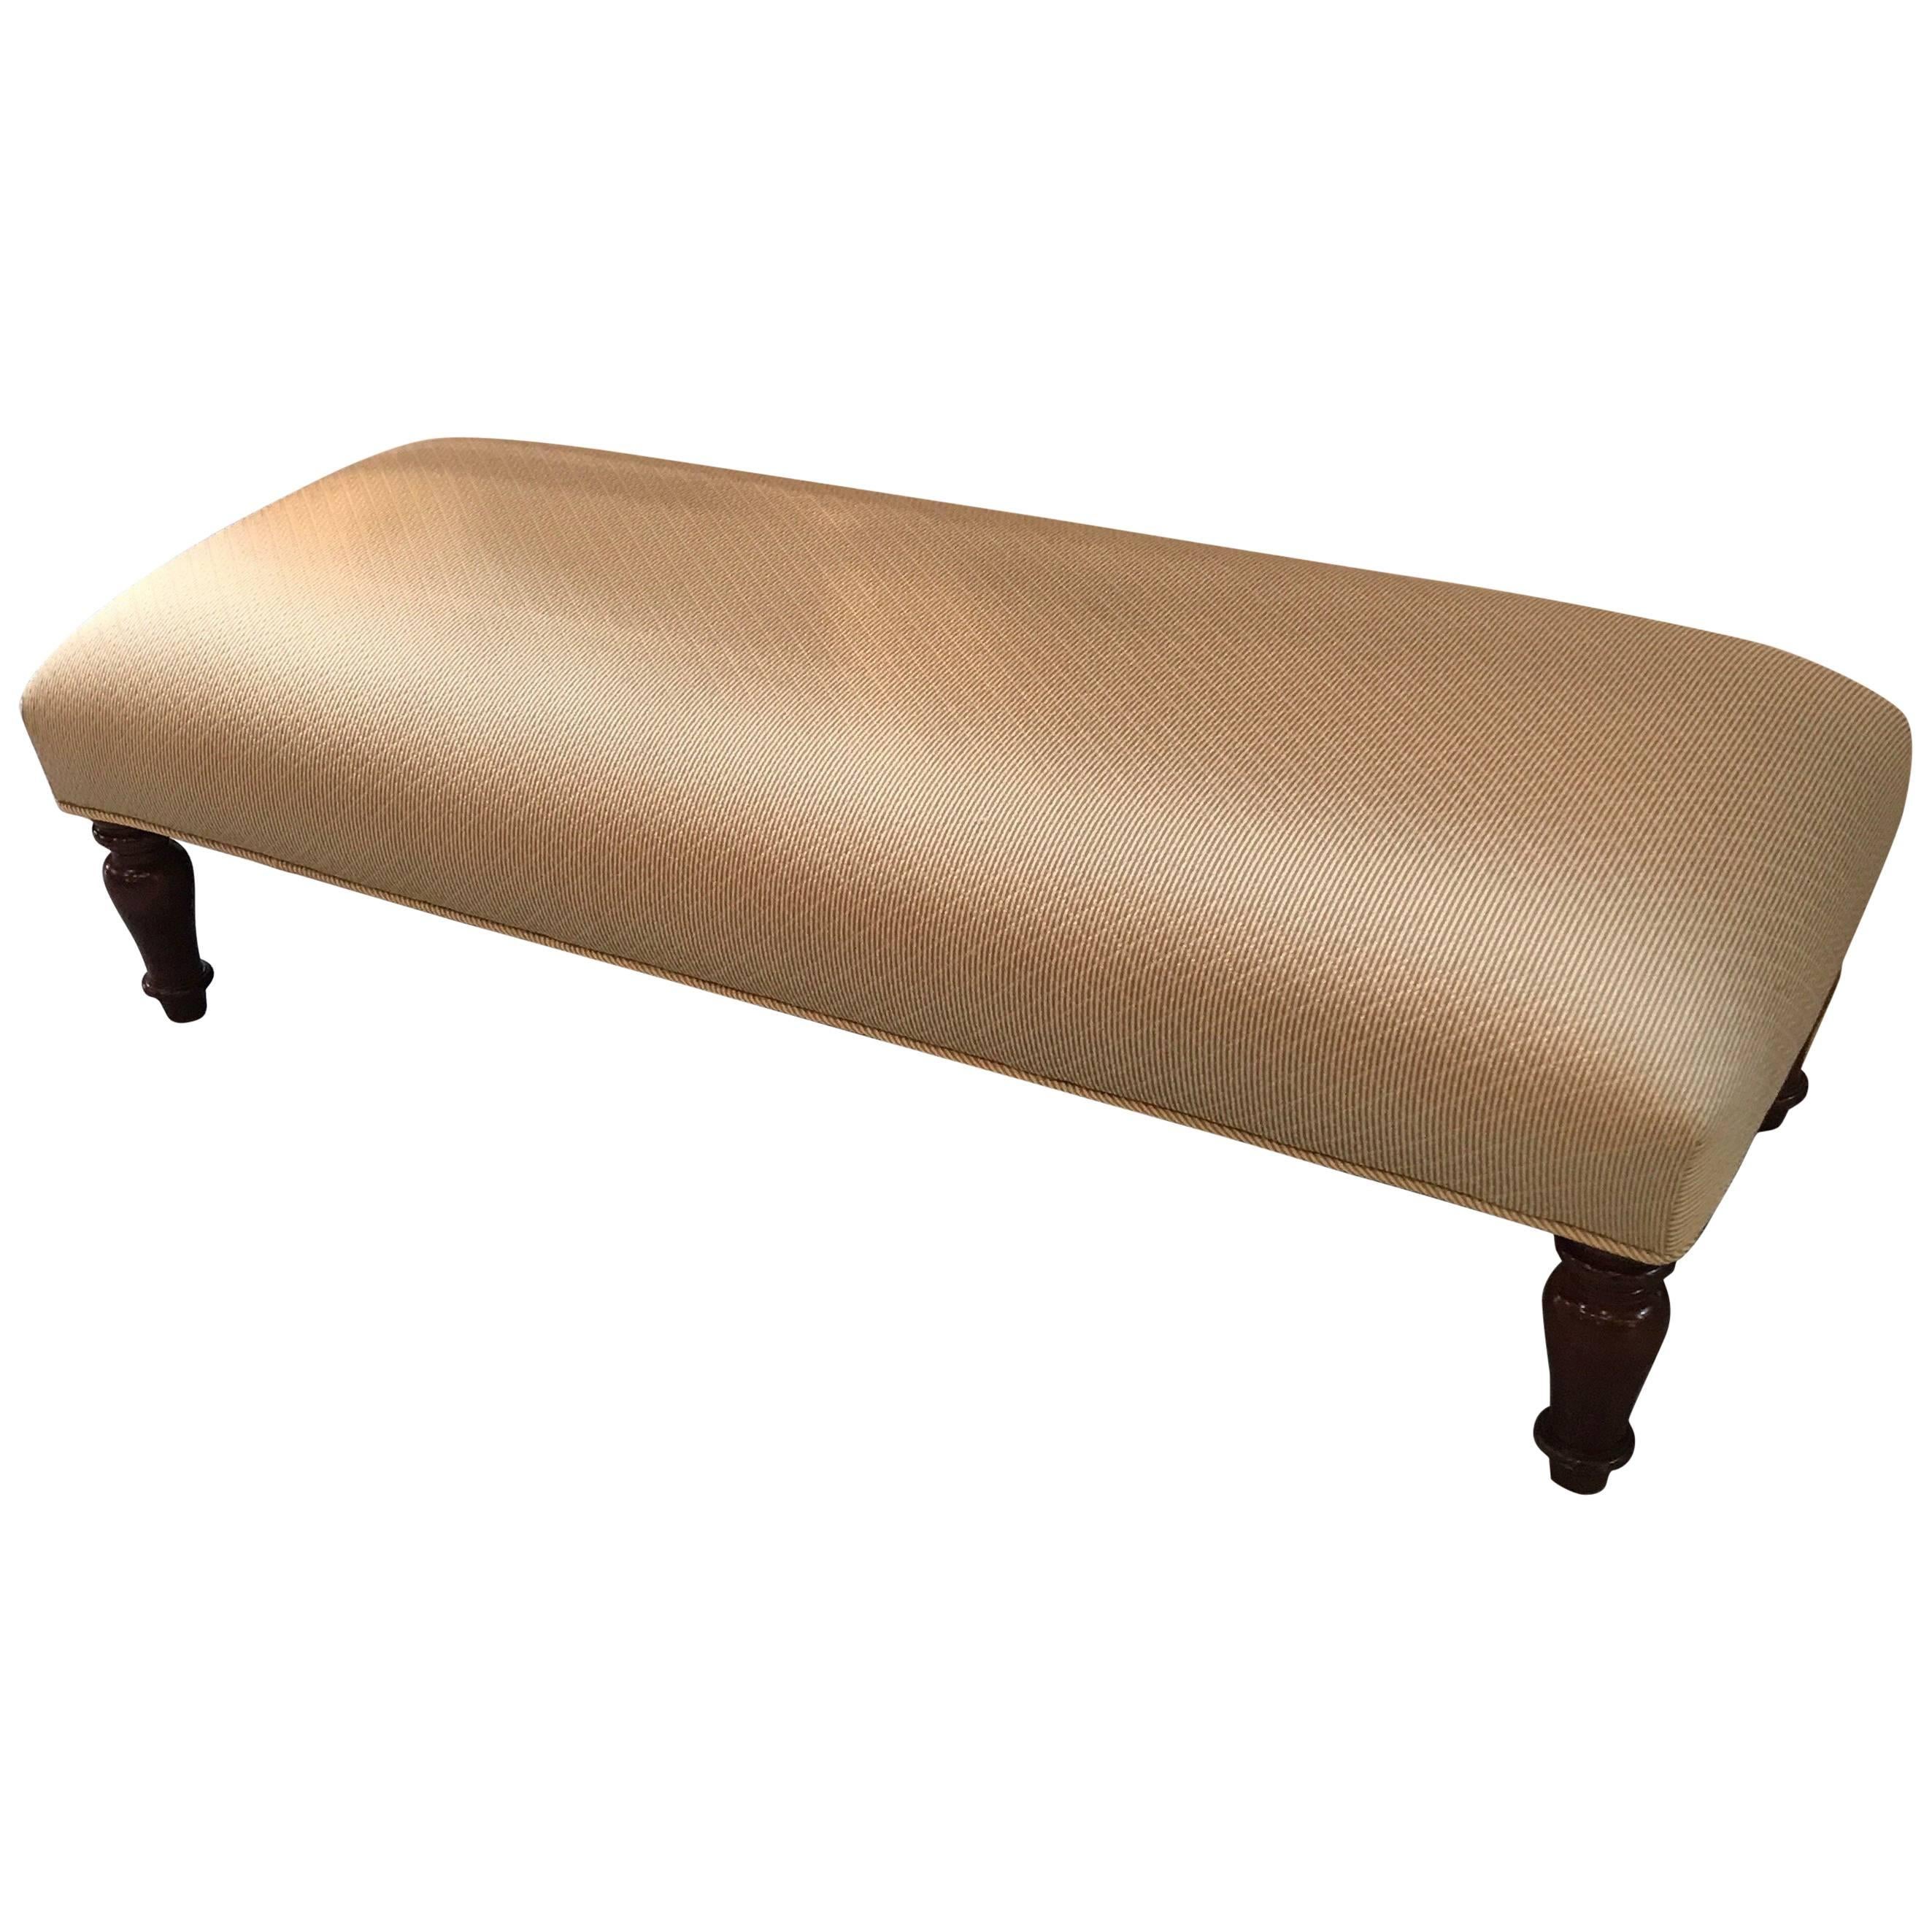 Upholstered Double Ottoman Bench